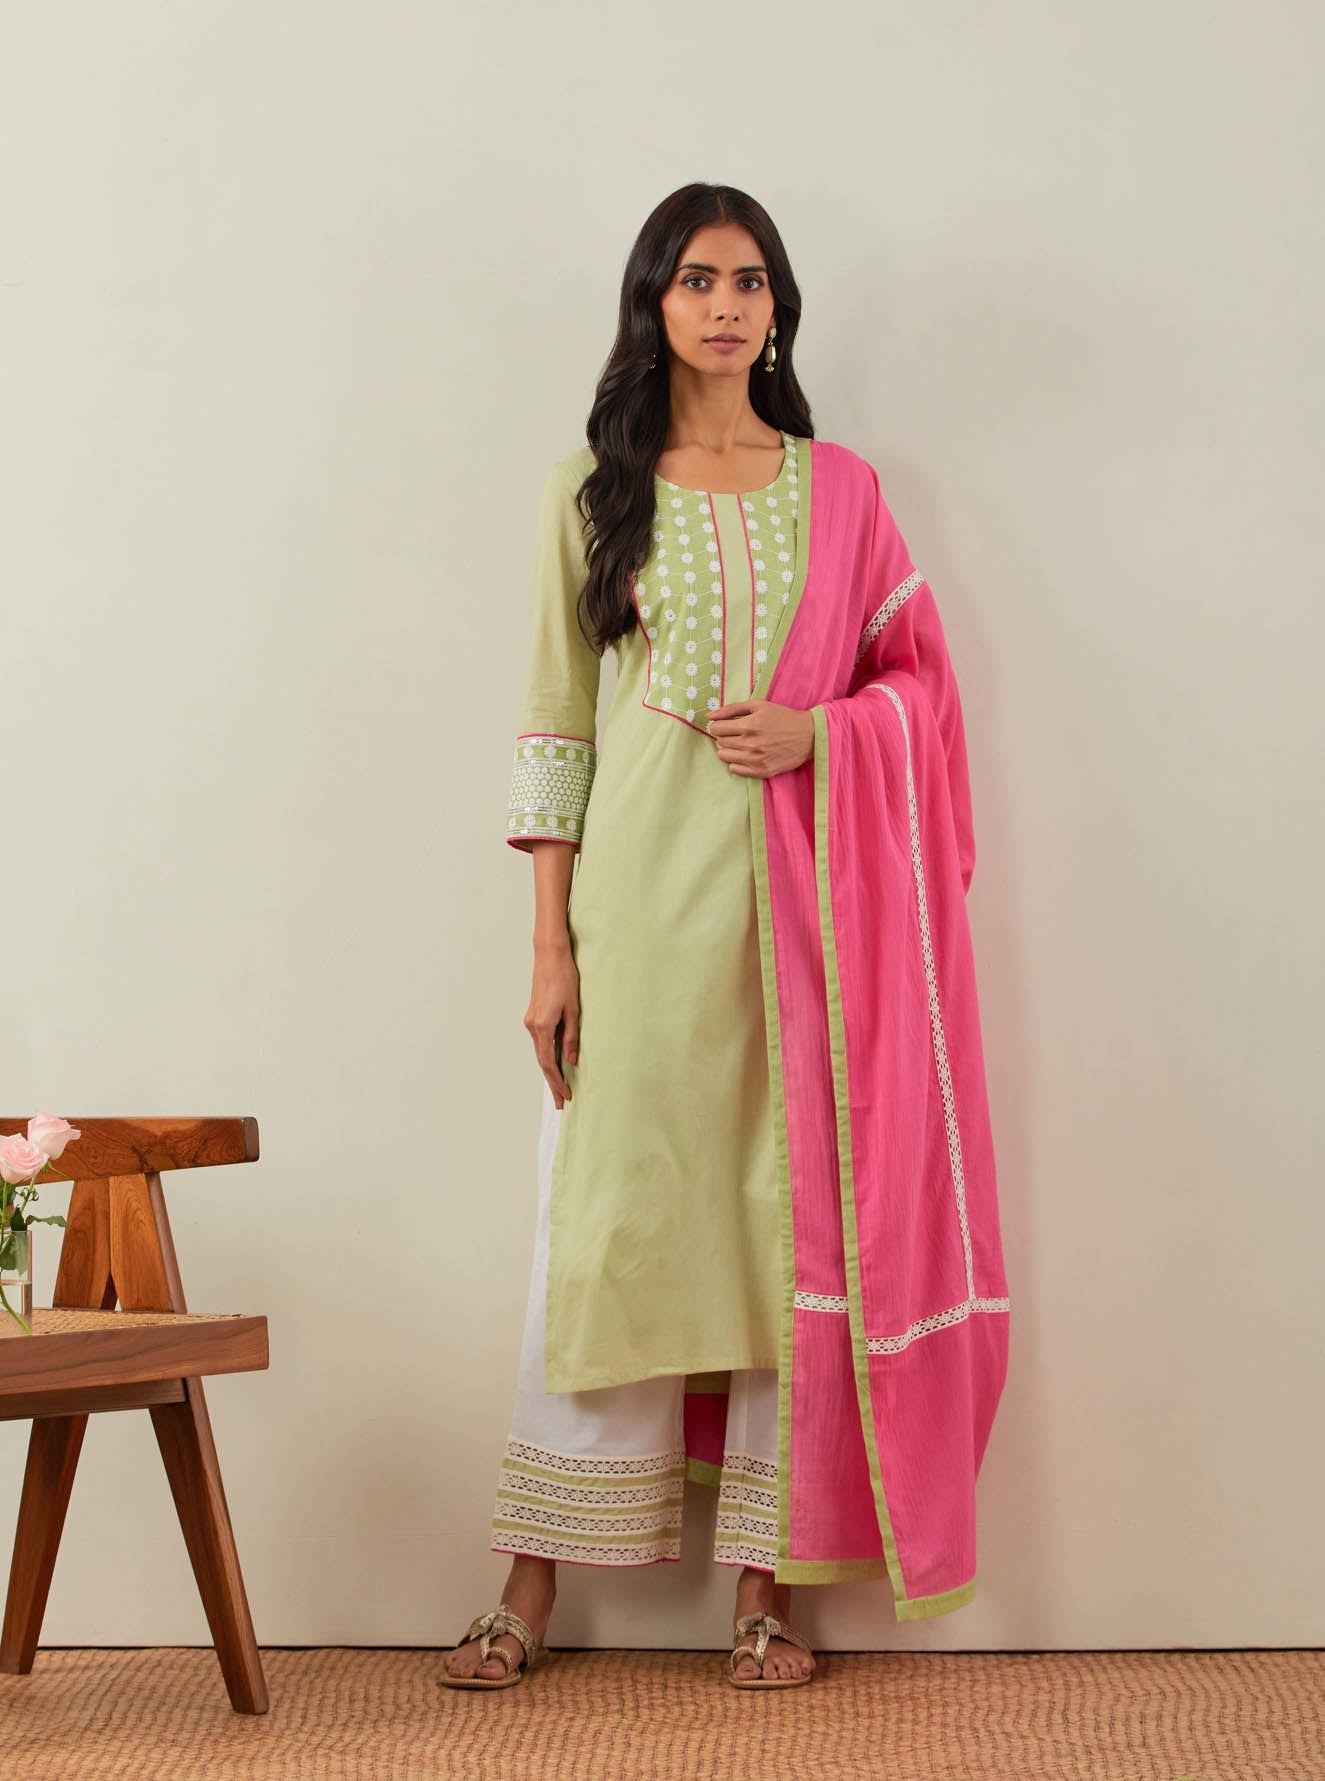 Green Plain Rooh Straight Kurta With Chikankari Yoke Details and Palazzo with wide lace detail & Dupatta (Set of 3) - The Indian Cause